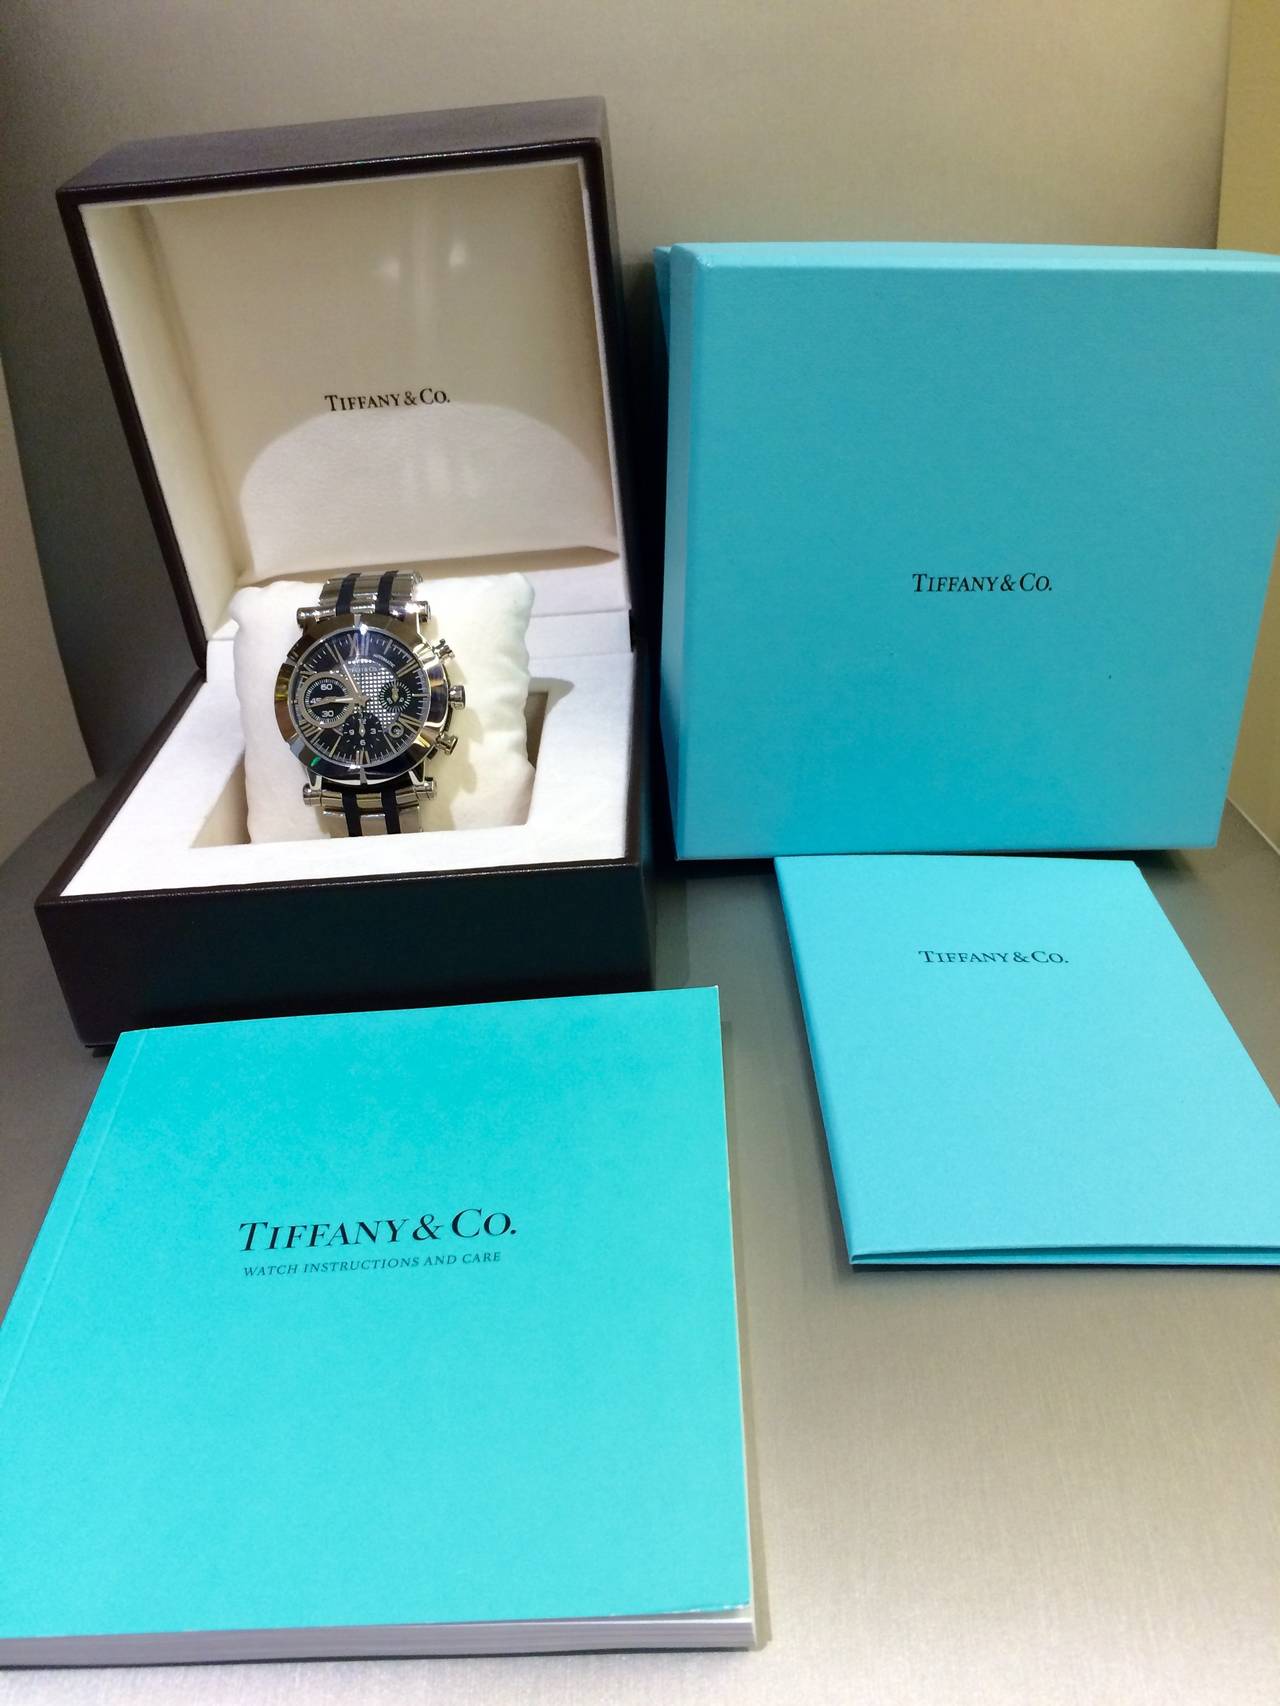 Tiffany Stainless Steel and Rubber Atlas Chronograph Wristwatch with Date, Complete with Box and Instruction Manual. Automatic Movement, T10018829